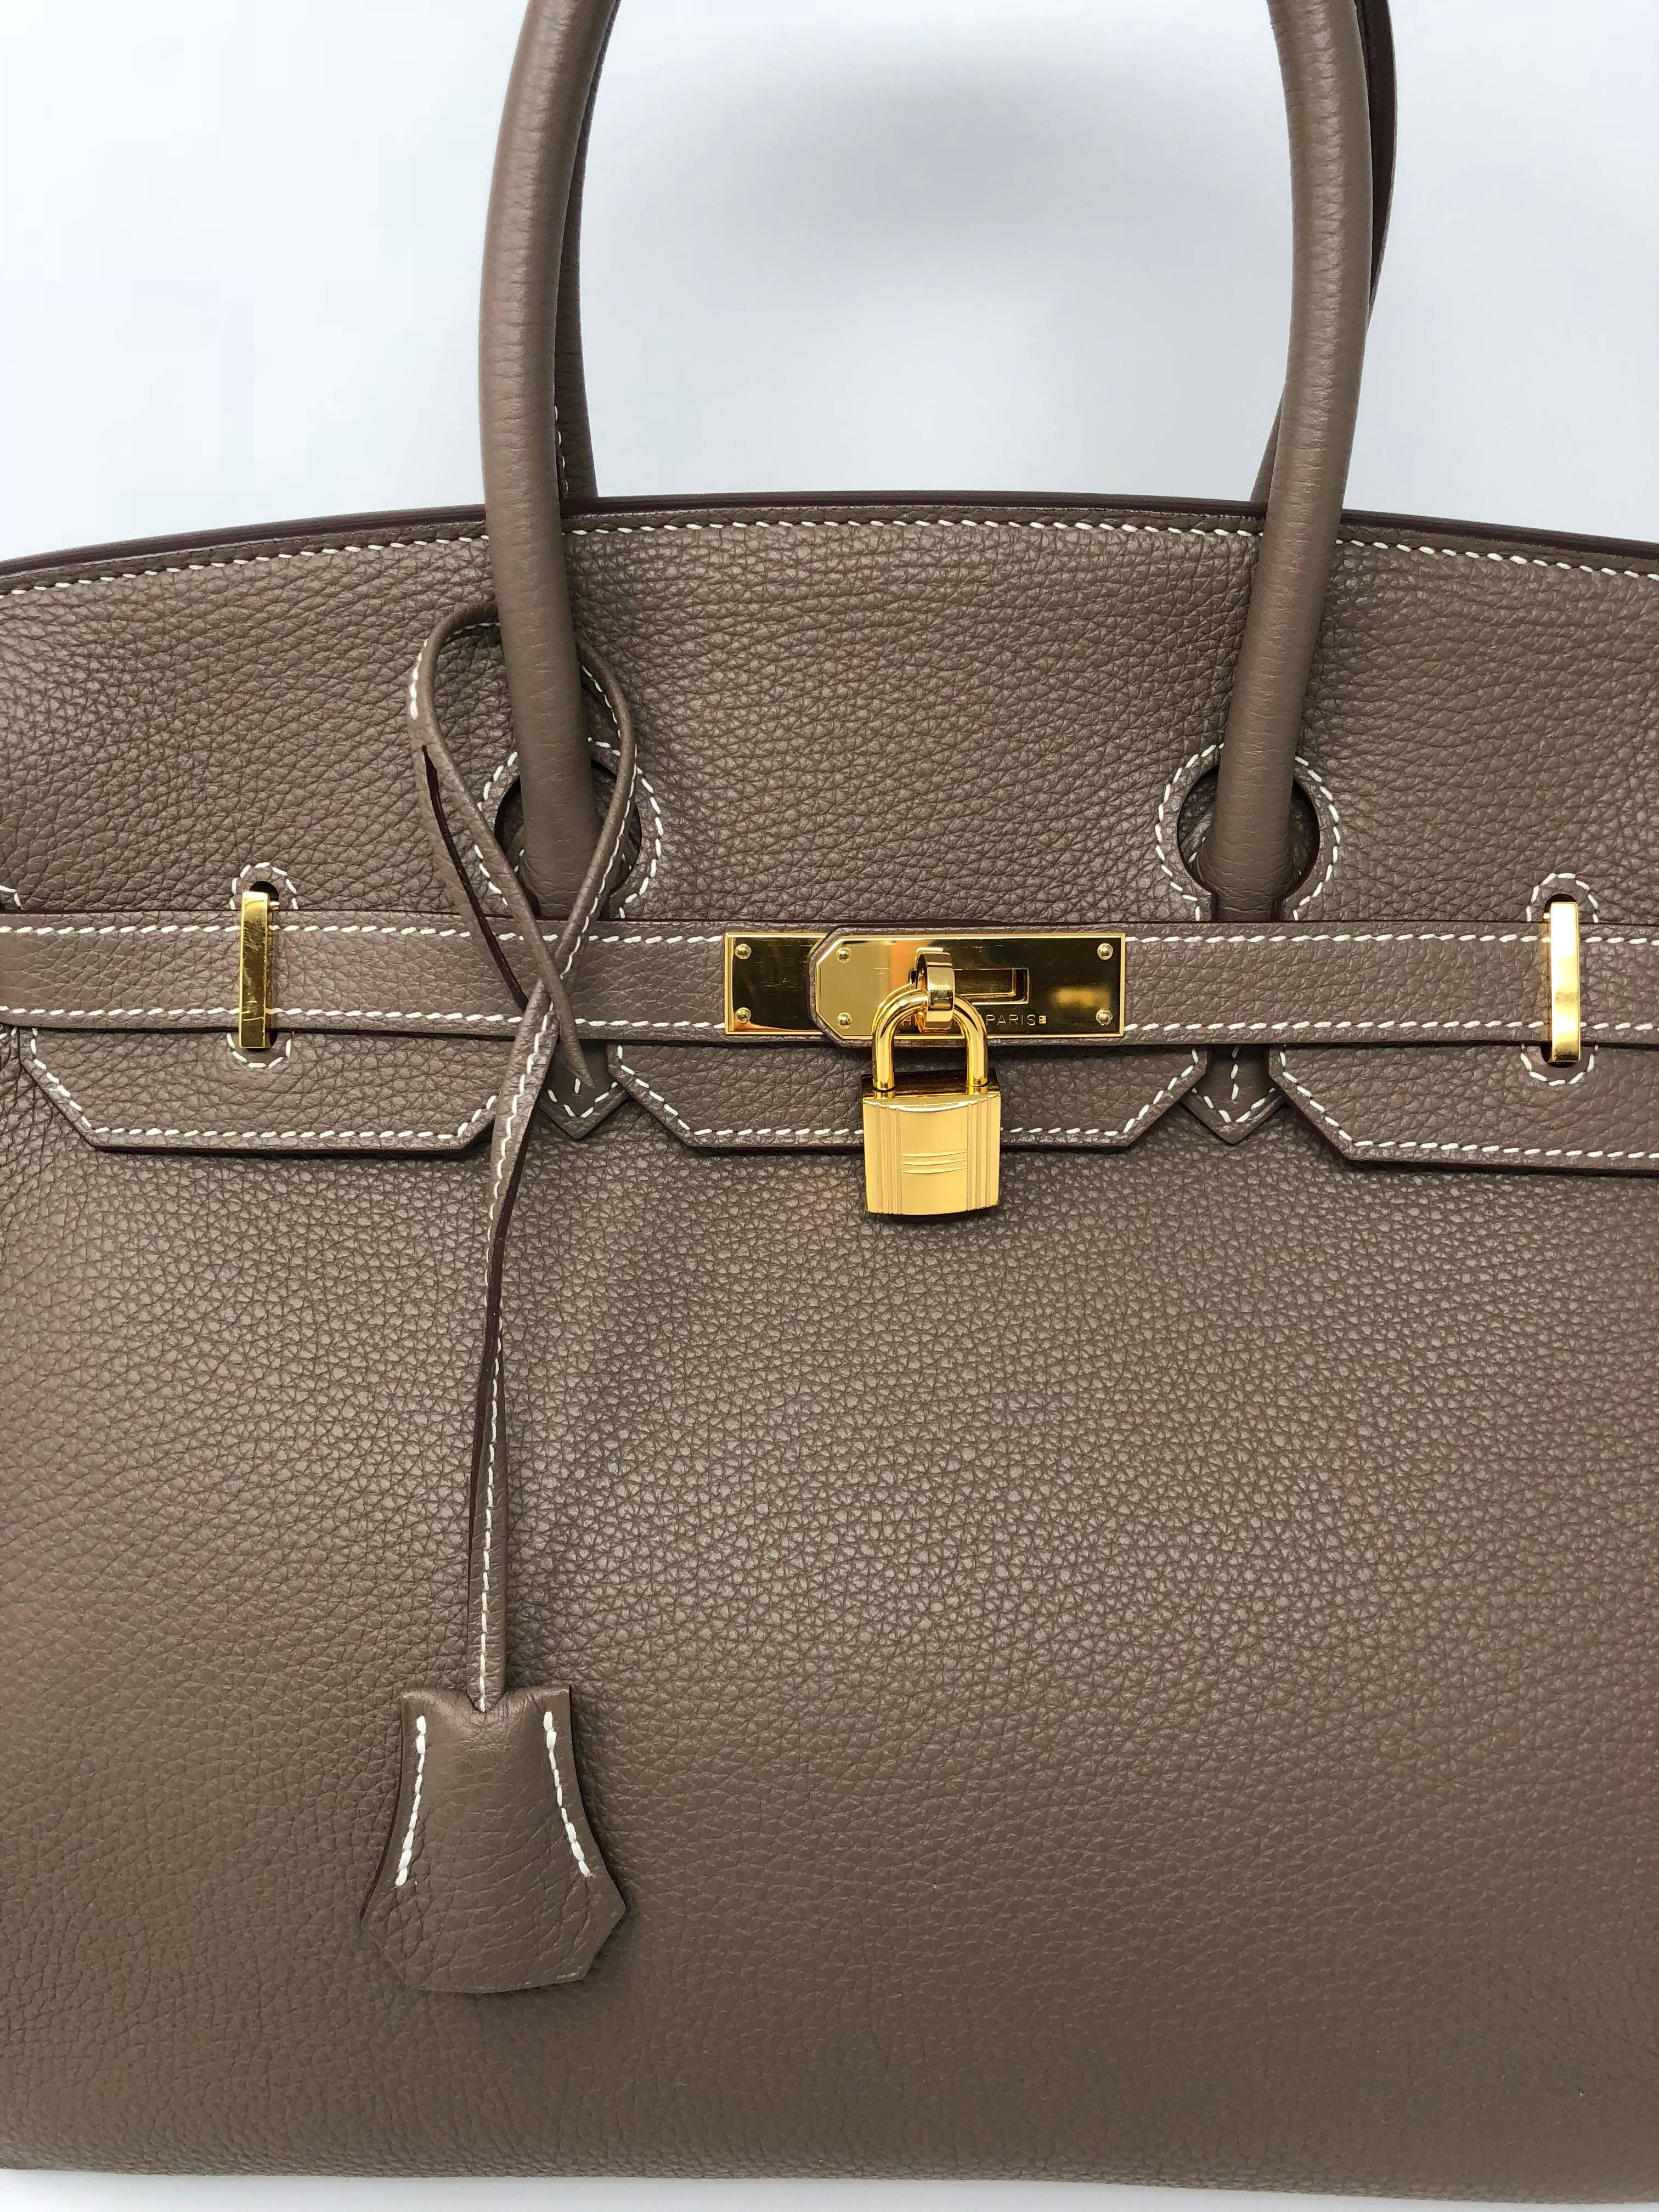 This guaranteed authentic Hermes Birkin 35 is in Etoupe color and in Togo leather.  Most wanted color Etoupe goes with everything. The smooth Togo leather is durable and scratch resistant. The gold hardware looks great and comes with the clochette,